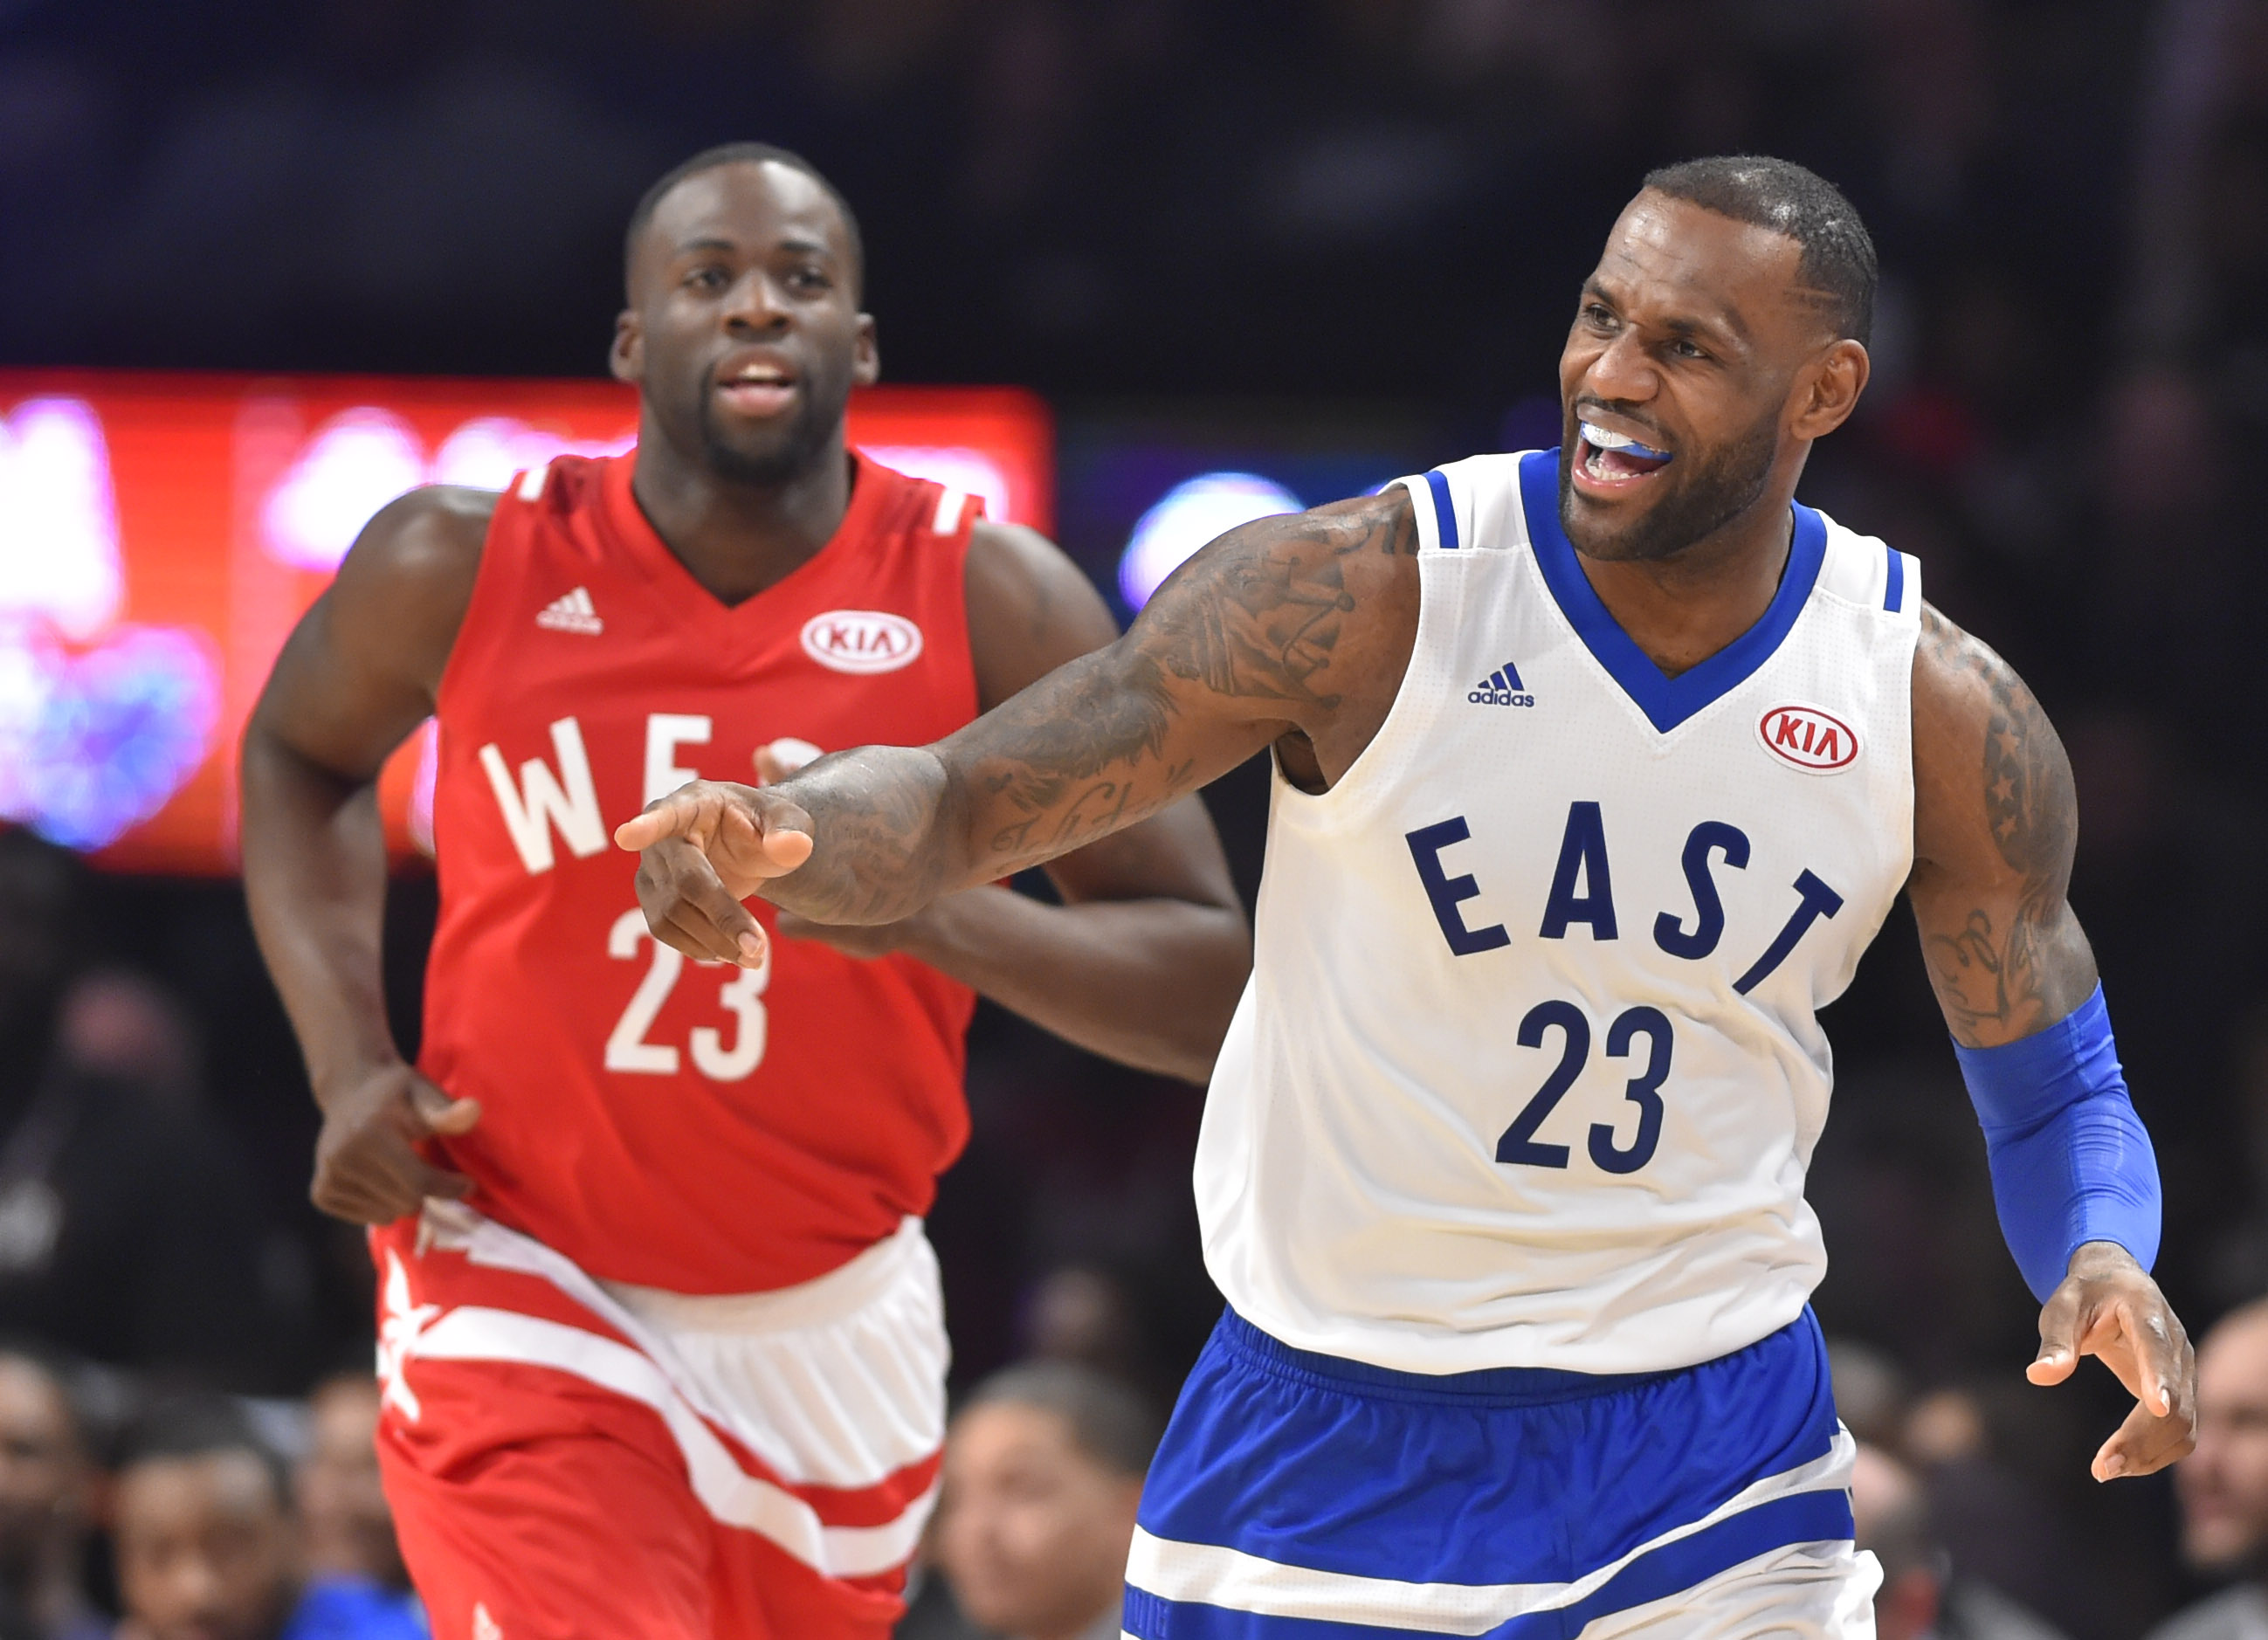 2017 NBA All-Star Game starting lineups announced 